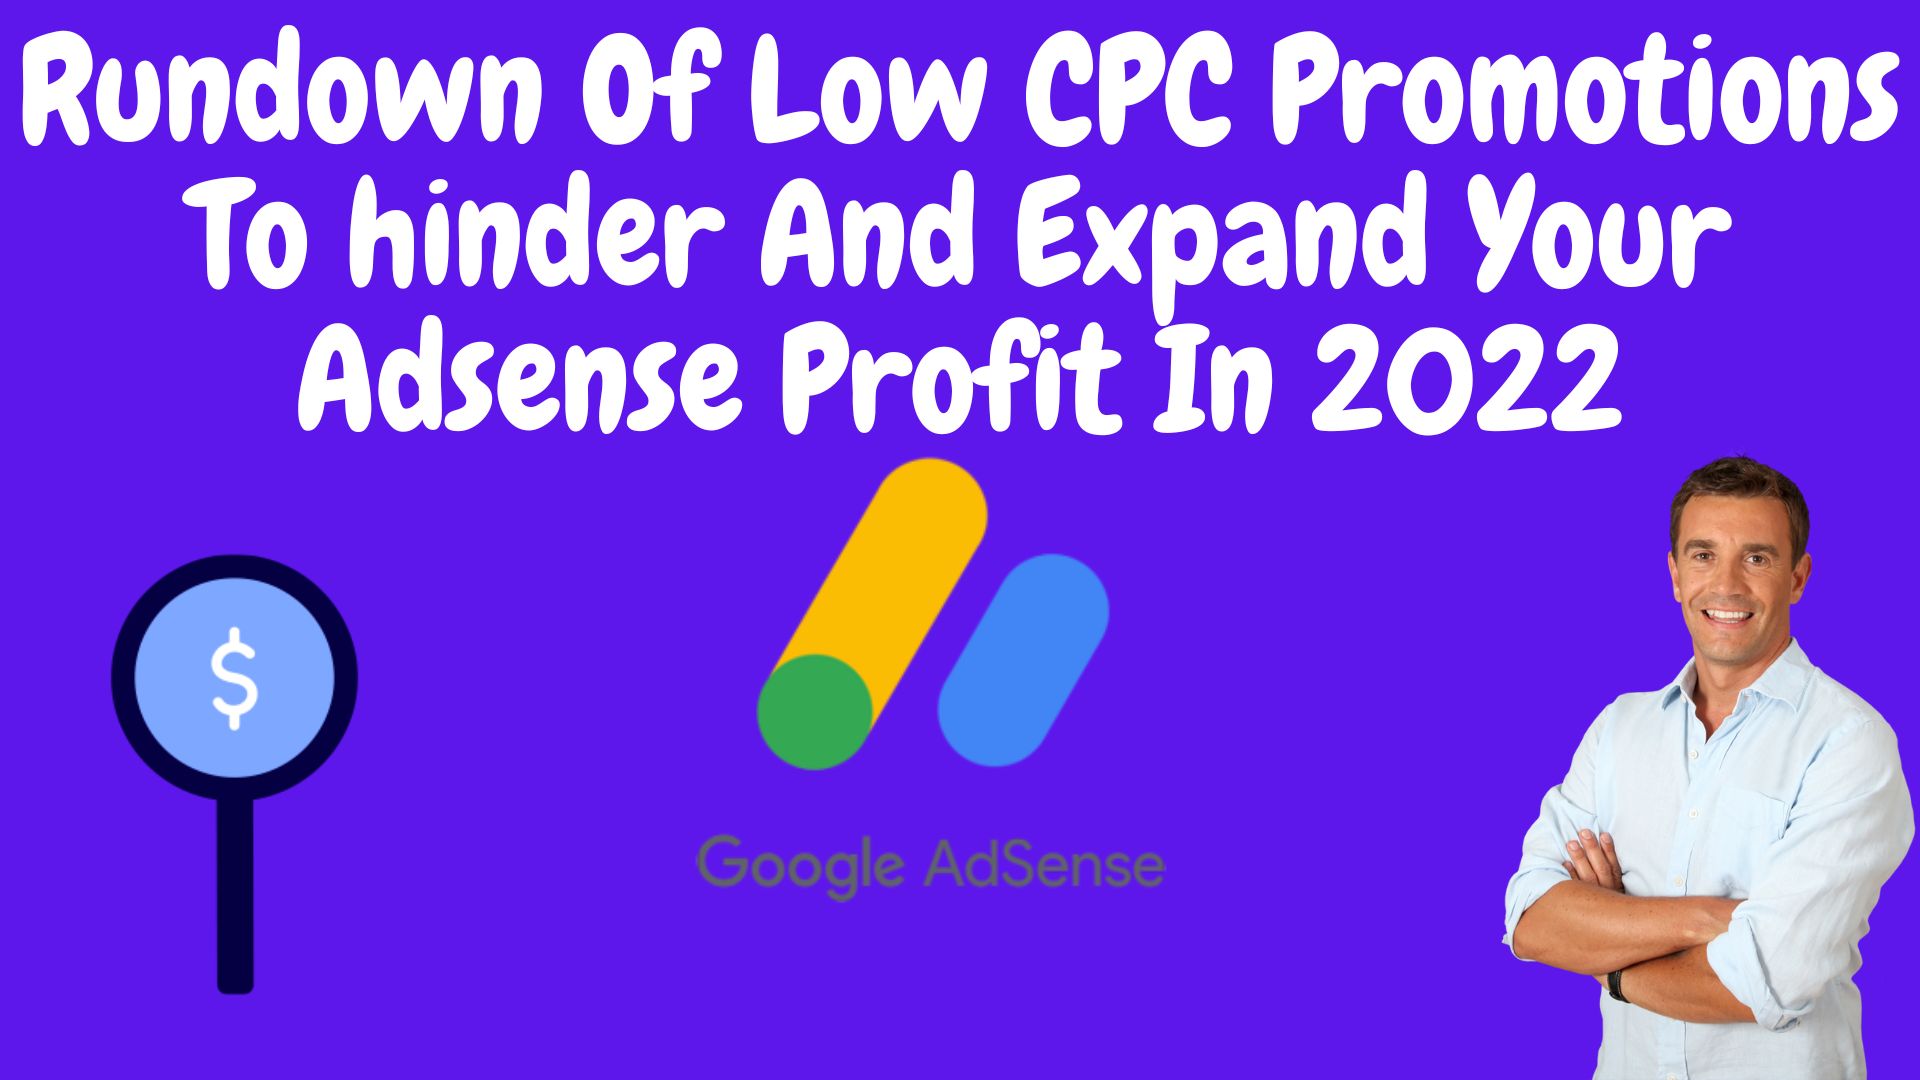 Rundown of low cpc promotions to hinder and expand your adsense profit in 2022